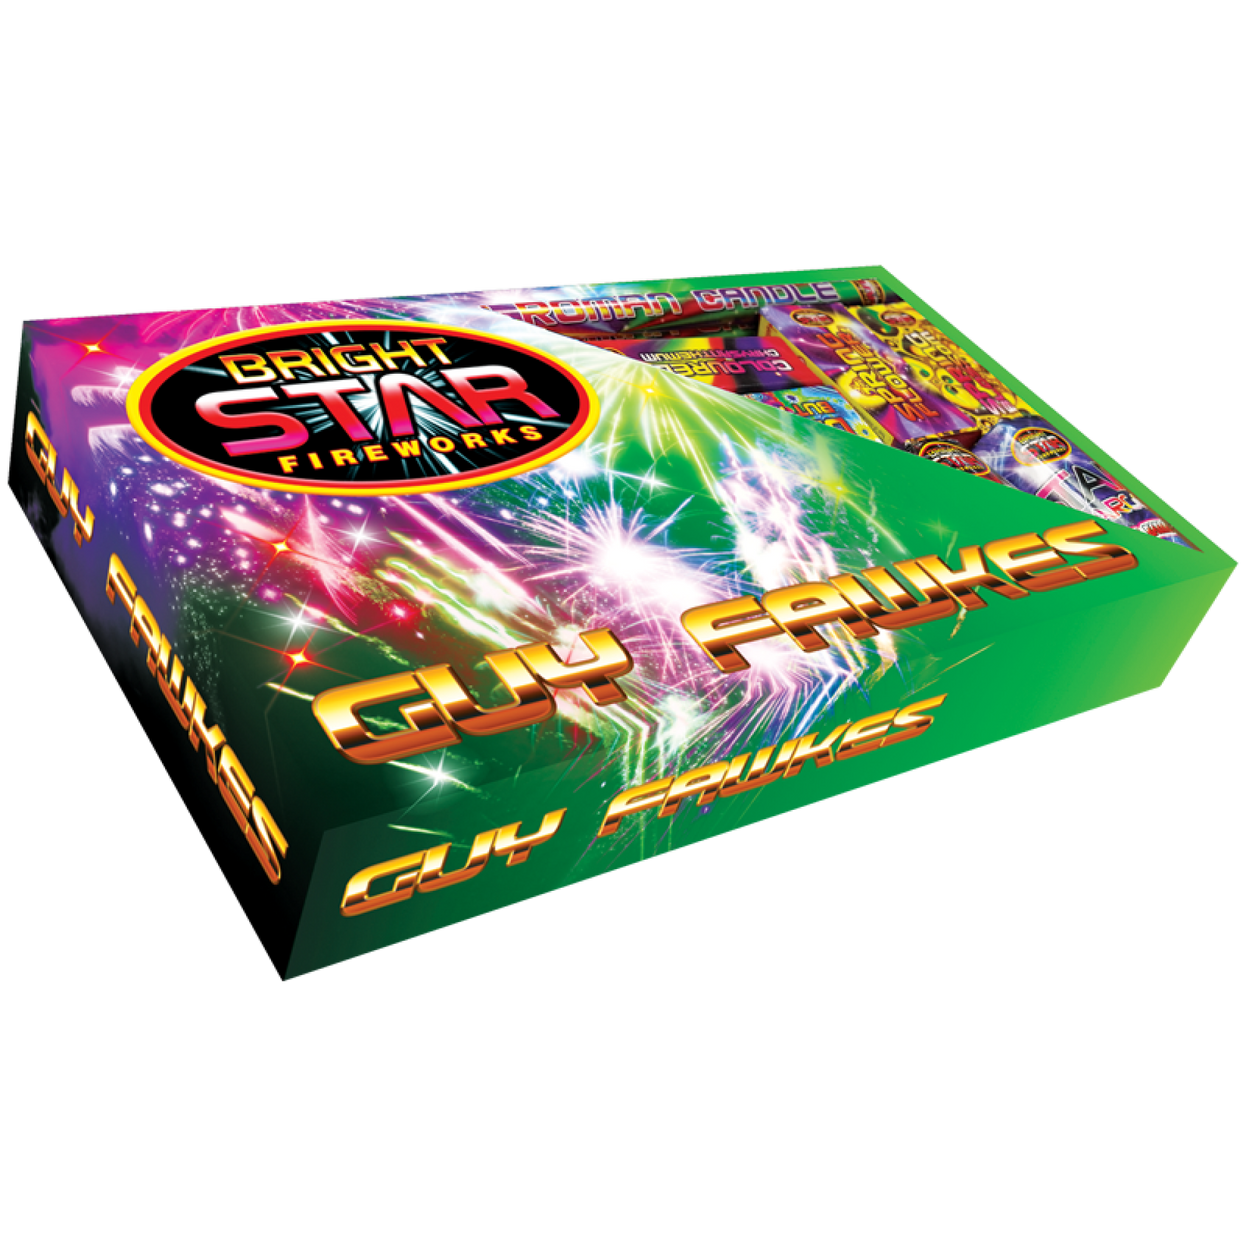 Guy Fawkes Selection Box 24pce By Bright Star Fireworks - BUY 1 GET 1 FREE!